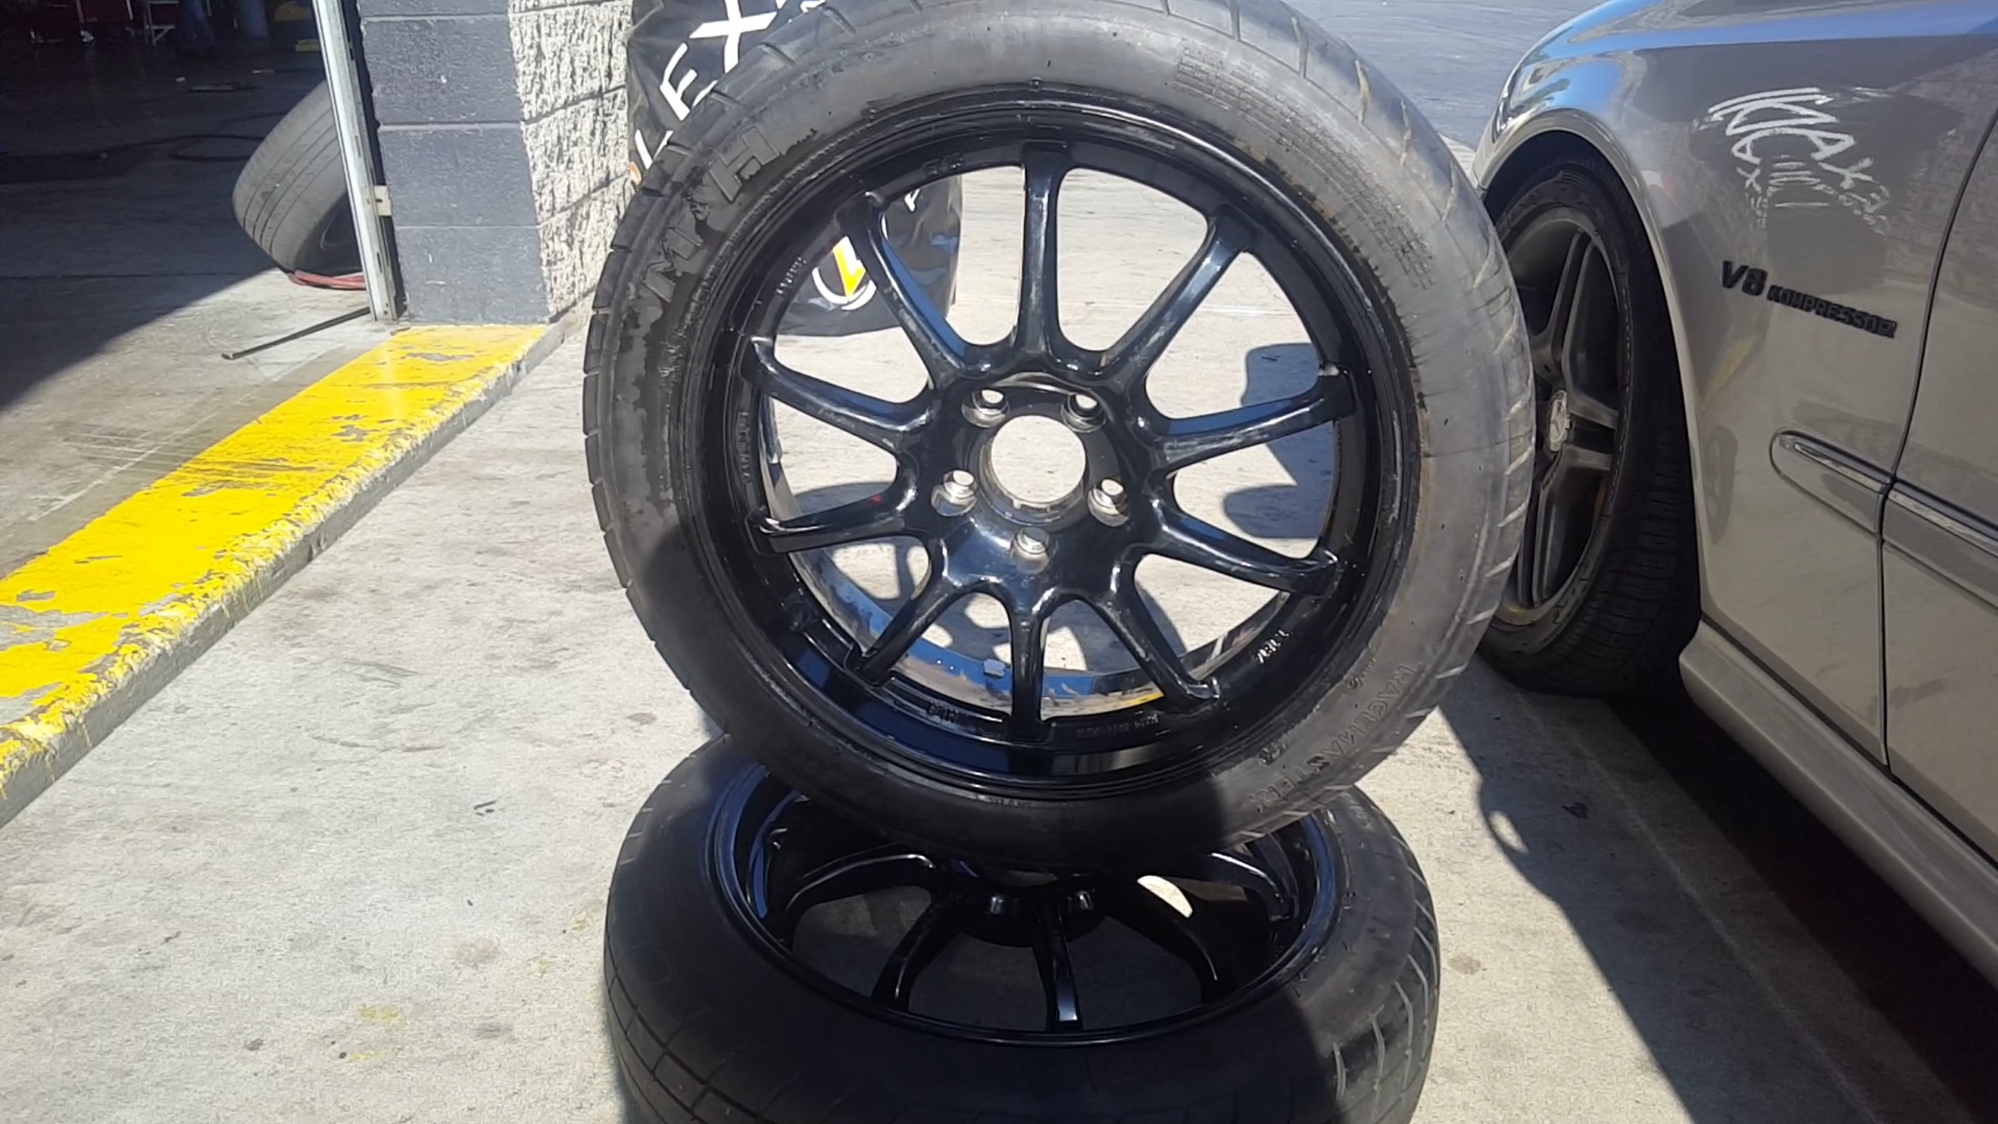 Wheels and Tires/Axles - 2 AMG 18inch front drag skinnys/spares with M&H 185/50R18's - Used - 2003 to 2014 Mercedes-Benz E55 AMG - Rancho Cucamonga, CA 91701, United States